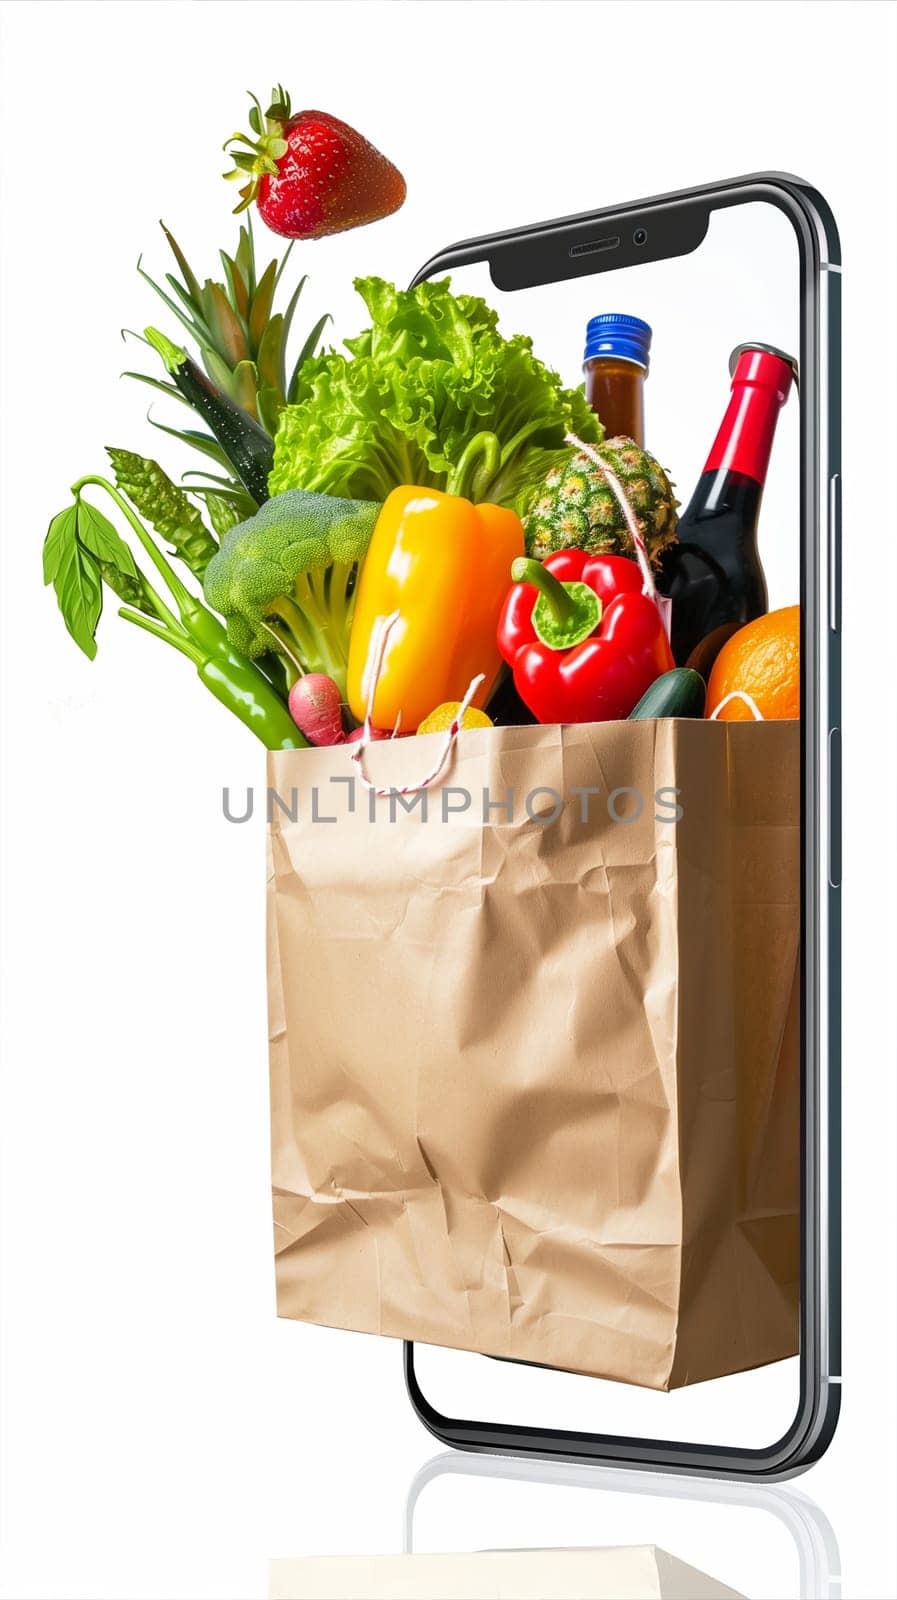 A shopping bag bursting with a colorful assortment of ripe fruits and fresh vegetables, ready to be brought home and enjoyed.